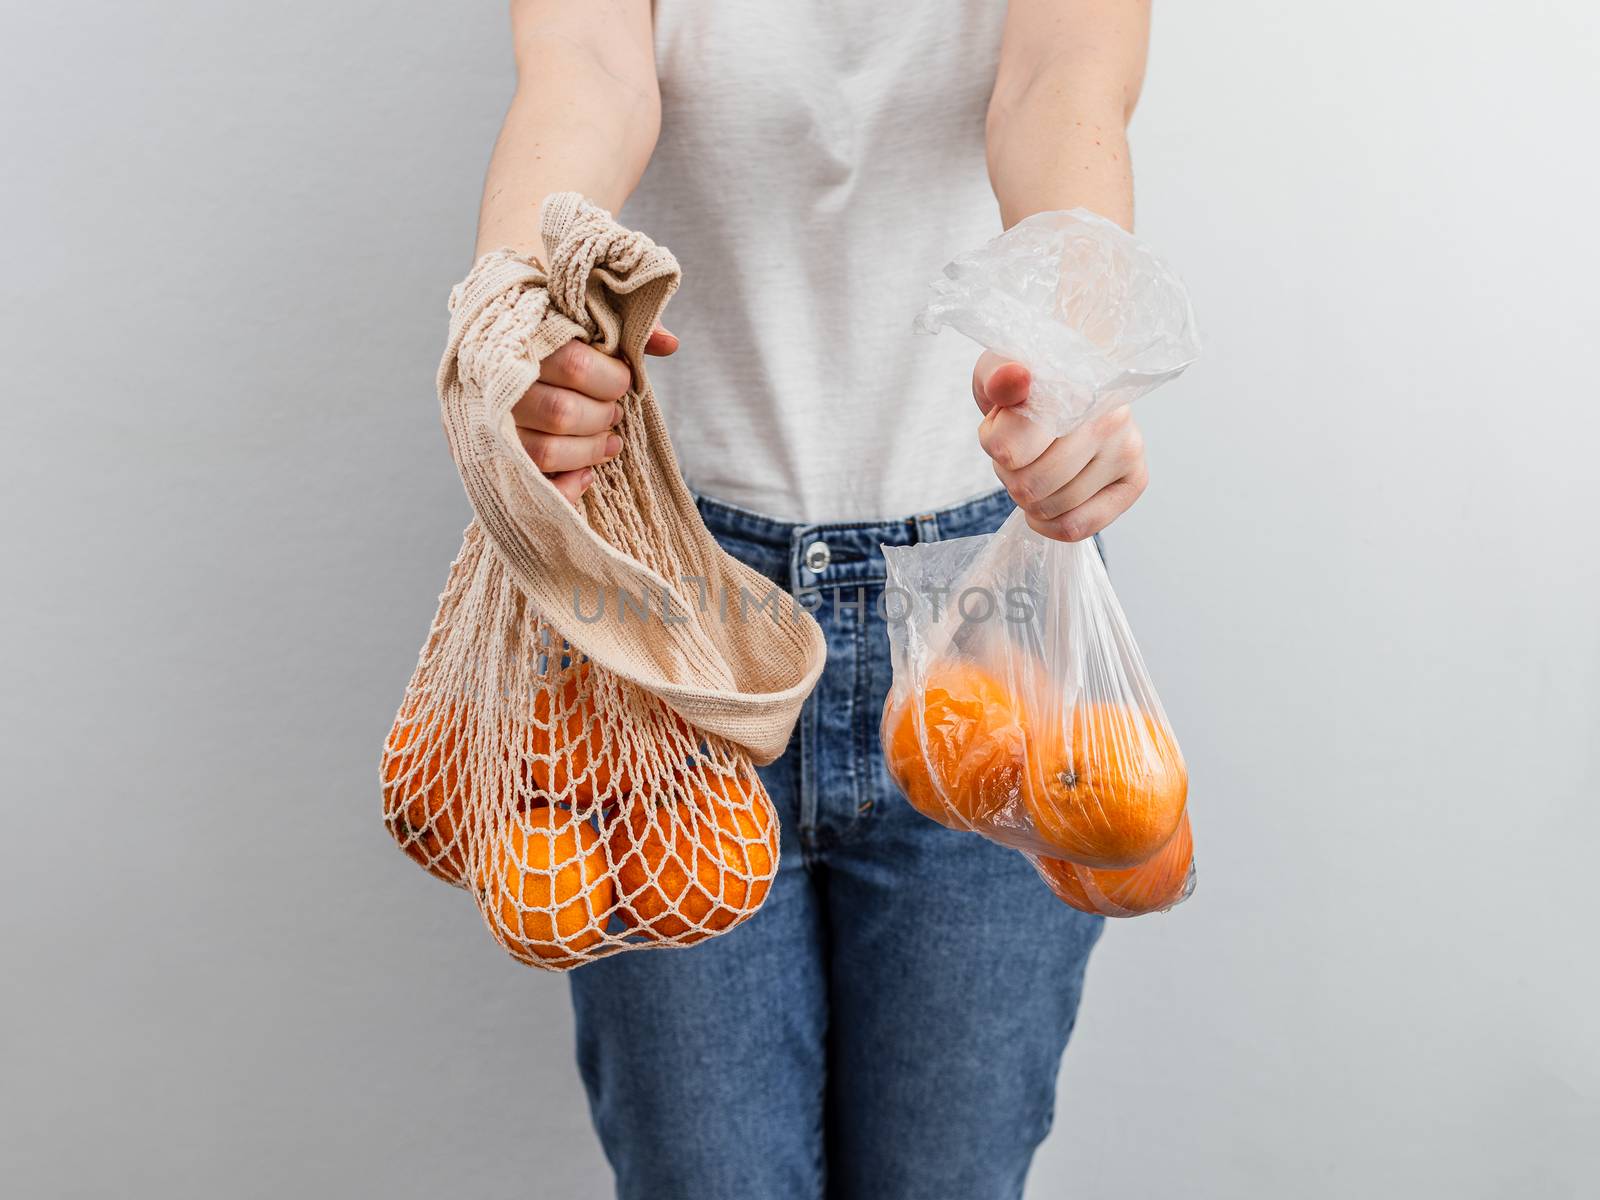 Oranges fruits in plastic bag and oranges in textile mesh bag in female hands near white wall background. Zero waste, food waste concept.